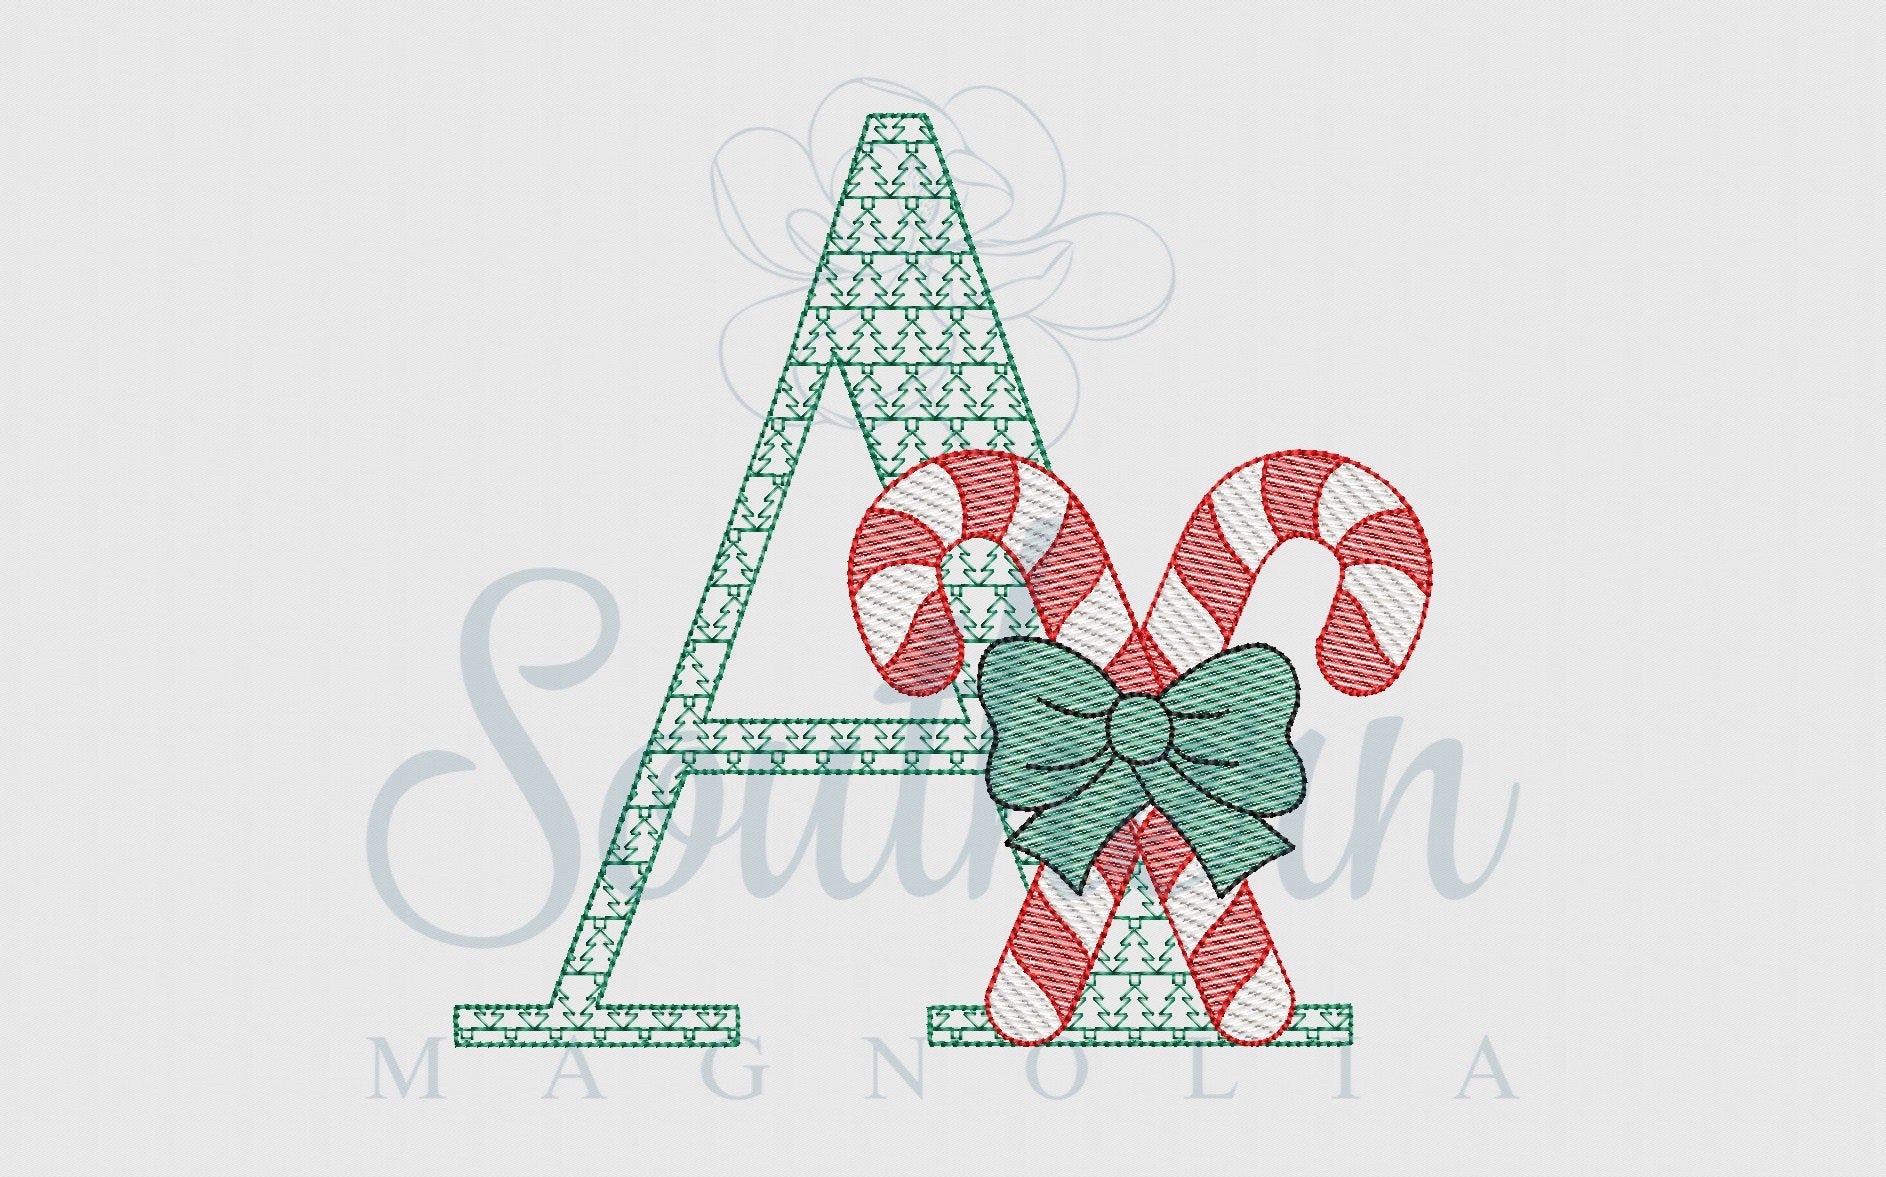 A Sketch Fill Candy Cane Bow Christmas Tree Motif Embroidery Design